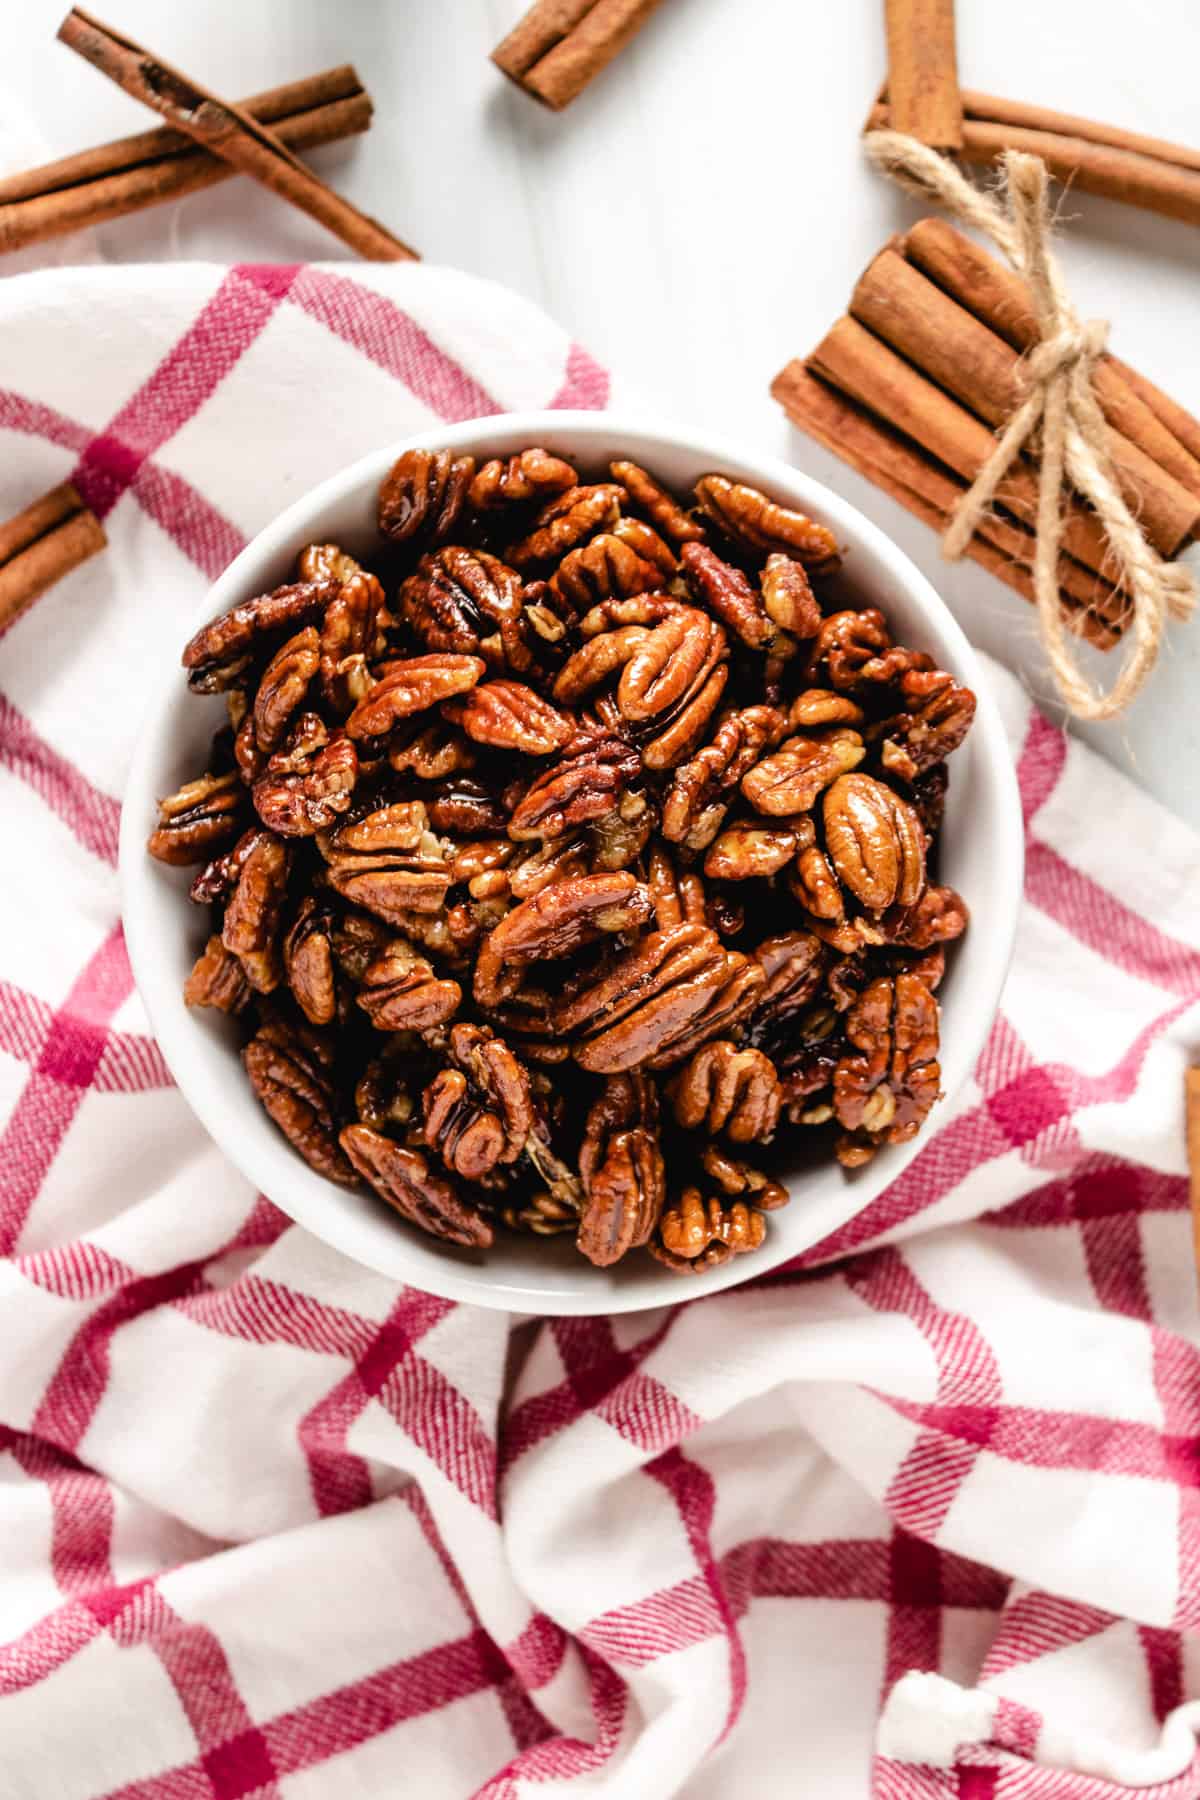 Top down view of a bowl of candied pecans.